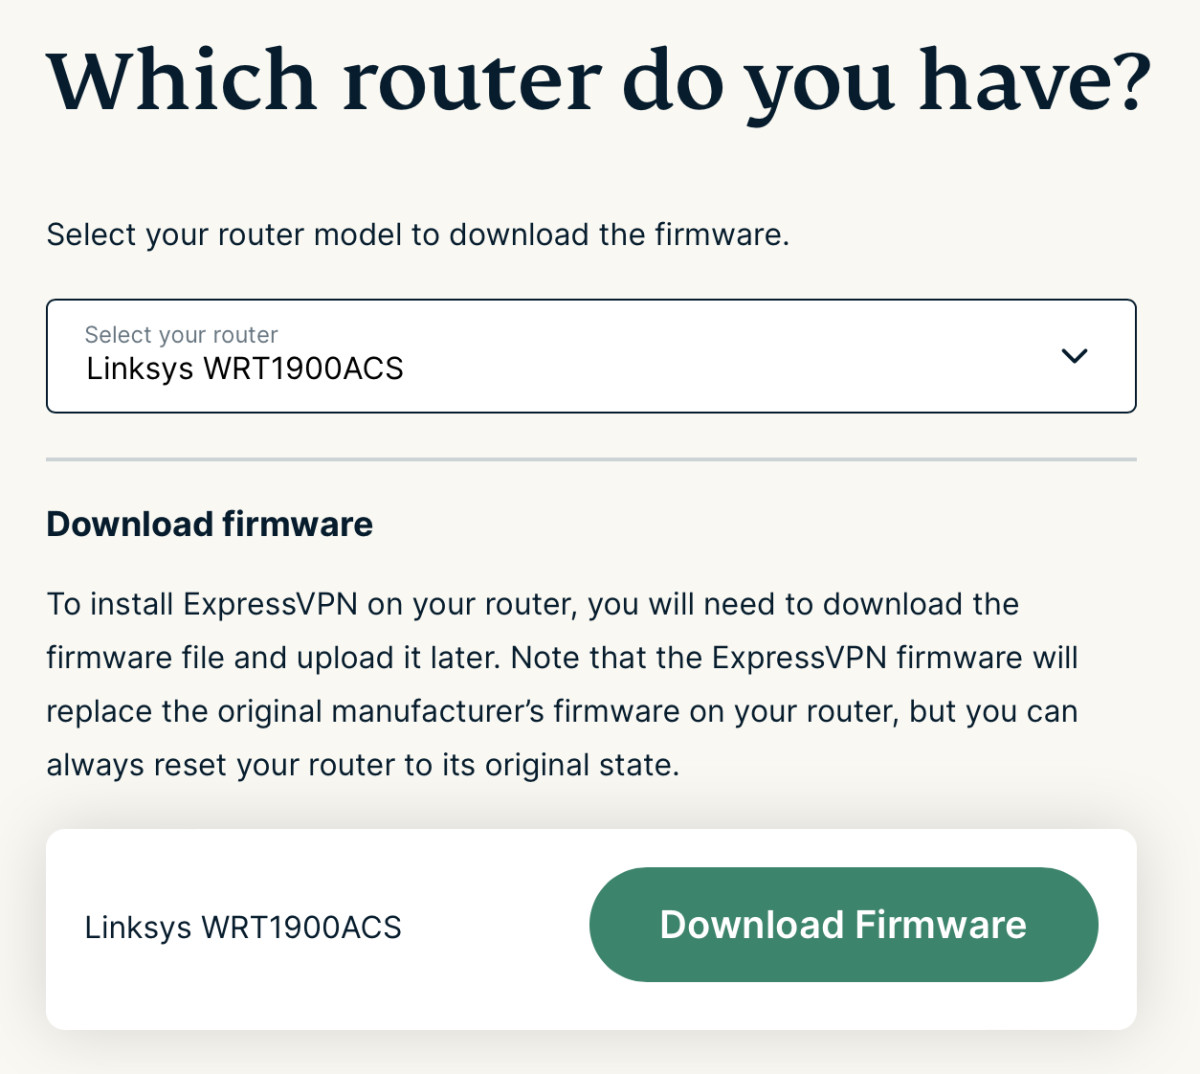 Downloading custom firmware on your router